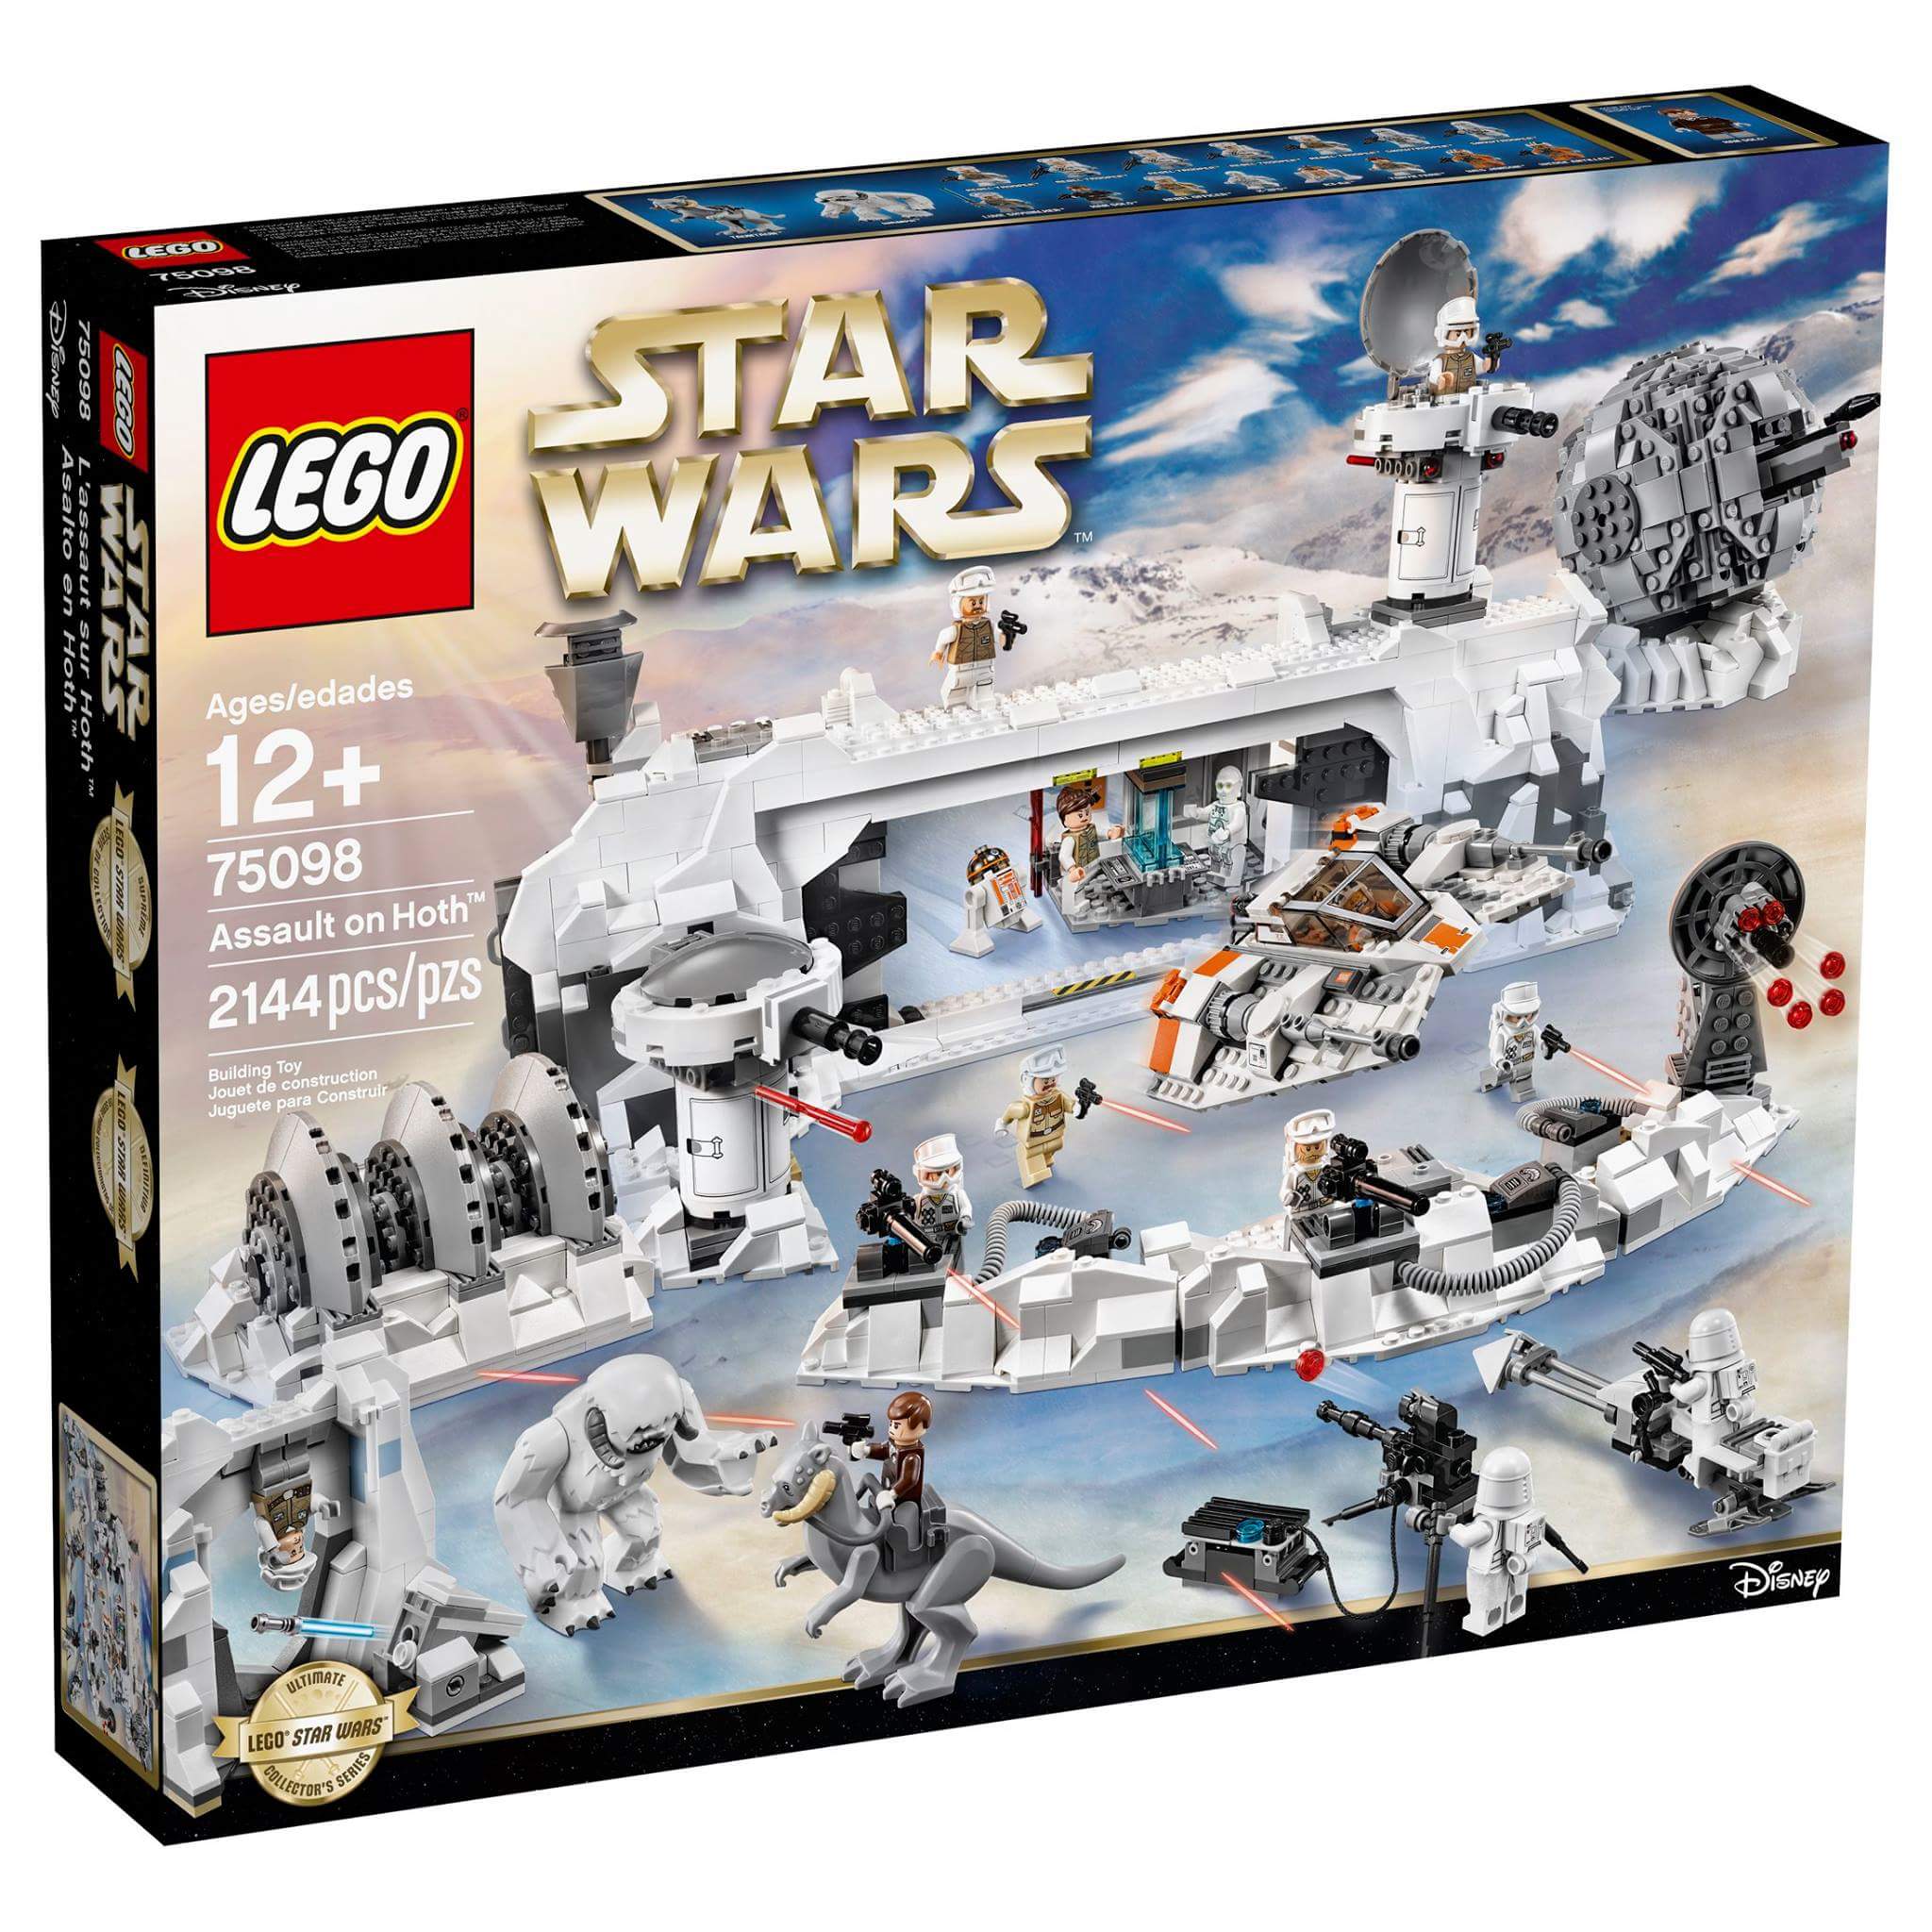 LEGO Star Wars 75098 Assault on Hoth Revealed | Geek Culture